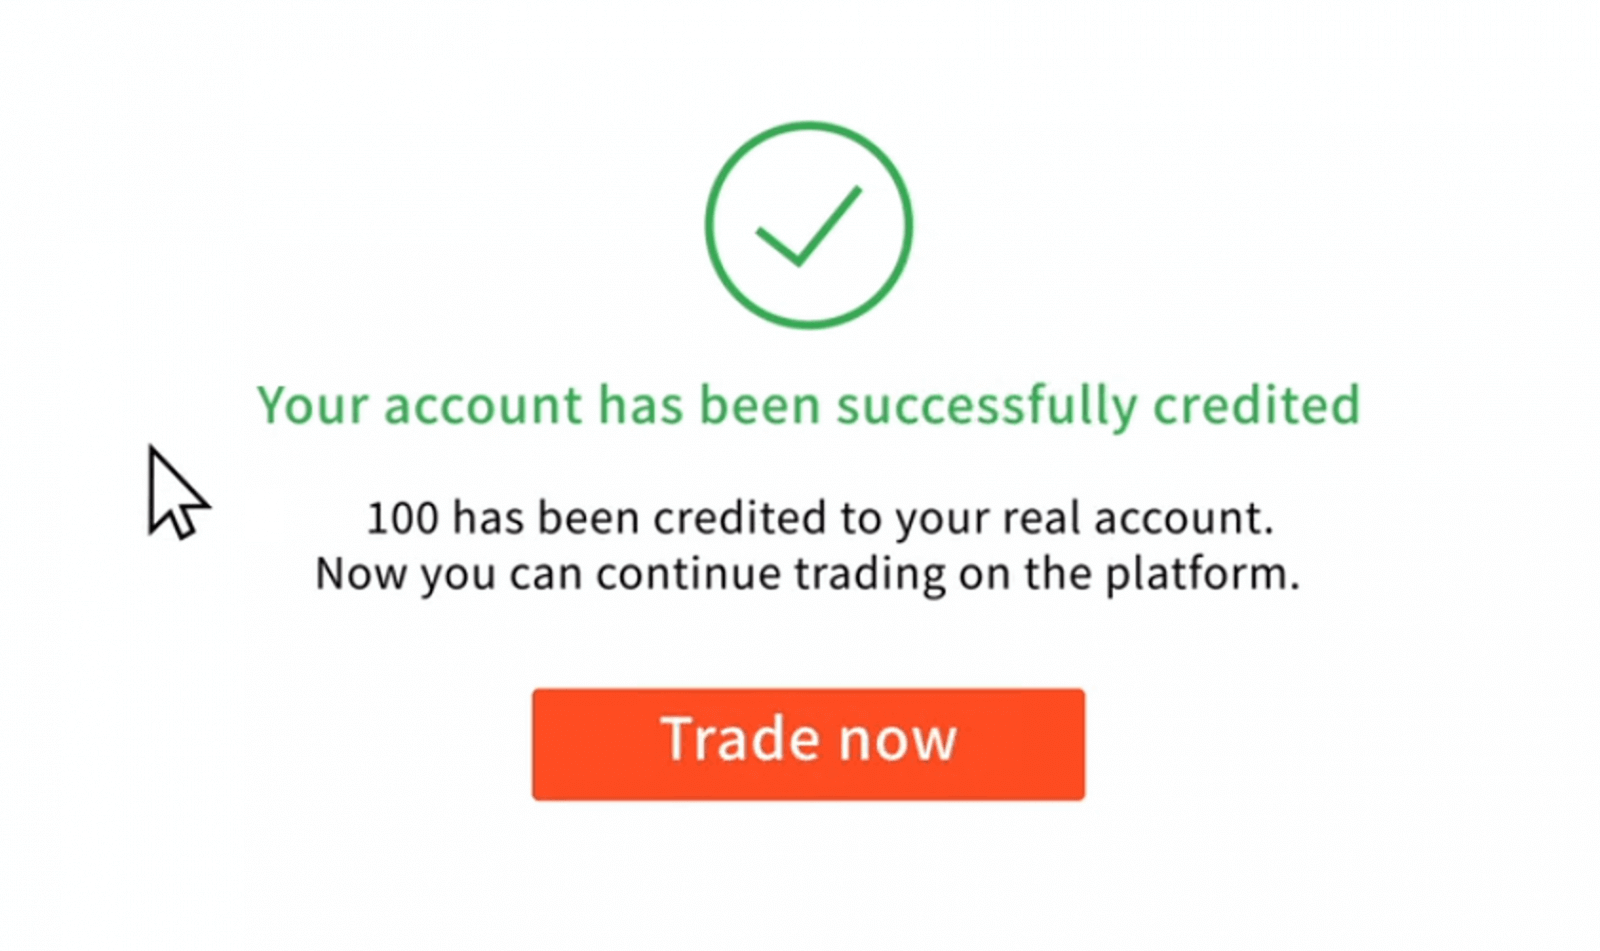 How to Sign Up and Deposit Money to IQ Option